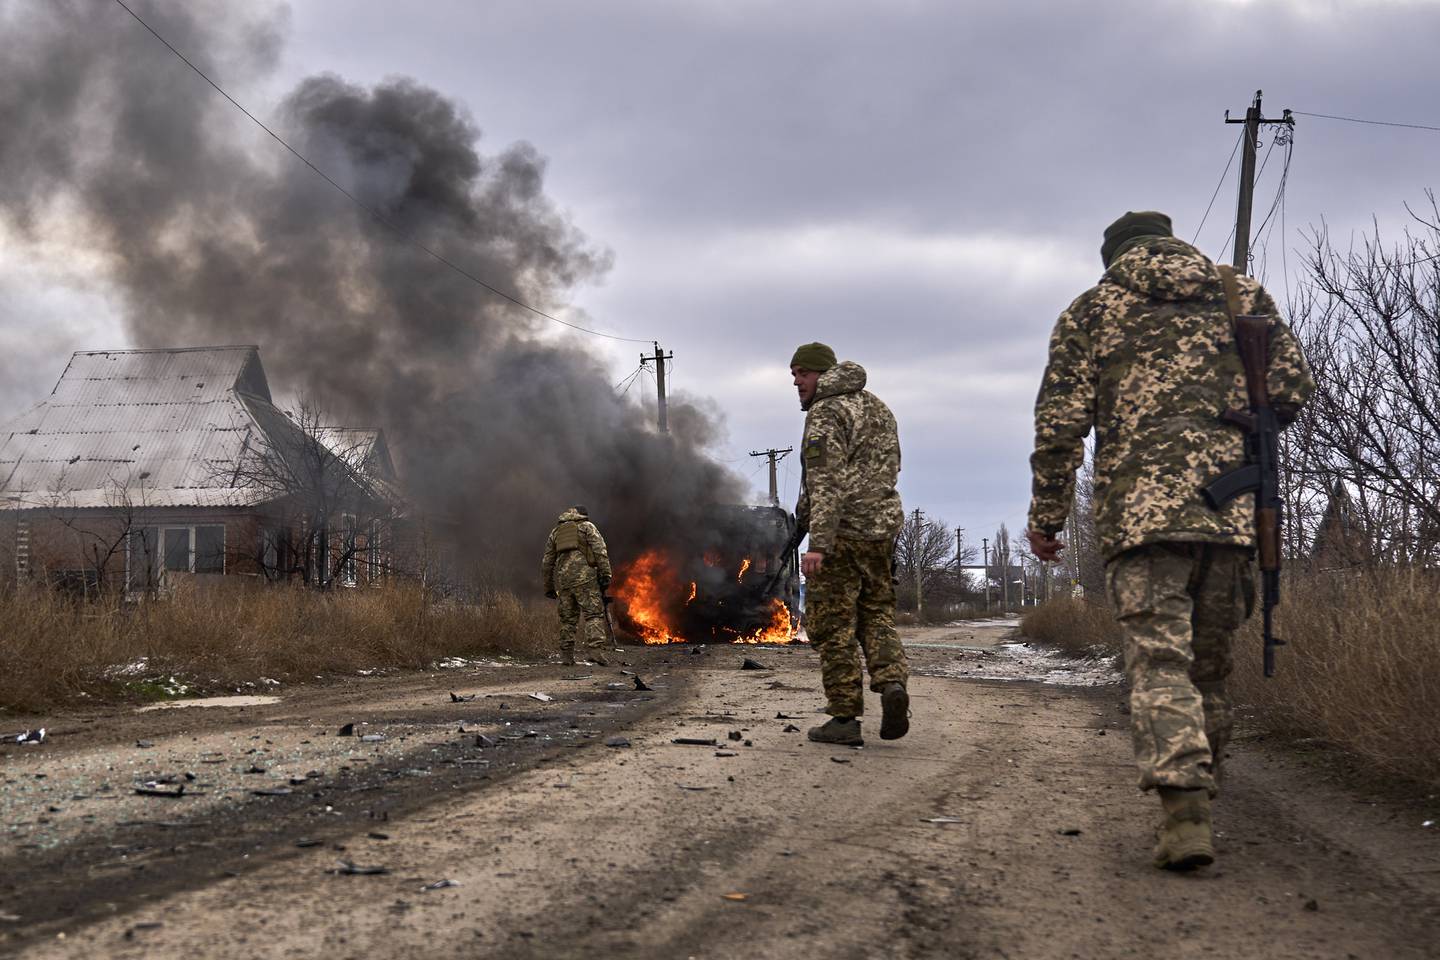 FILE - In this photo provided by the Ukrainian 10th Mountain Assault Brigade "Edelweiss", Ukrainian soldiers pass by a volunteer bus burning after a Russian drone hit it near Bakhmut, Donetsk region, Ukraine, Thursday, Nov. 23, 2023. A gloomy mood hangs over Ukraine’s soldiers nearly two years after Russia invaded their country. Ukrainian soldiers remain fiercely determined to win, despite a disappointing counteroffensive this summer and signs of wavering financial support from allies. (Shandyba Mykyta, Ukrainian 10th Mountain Assault Brigade "Edelweiss" via AP, File)